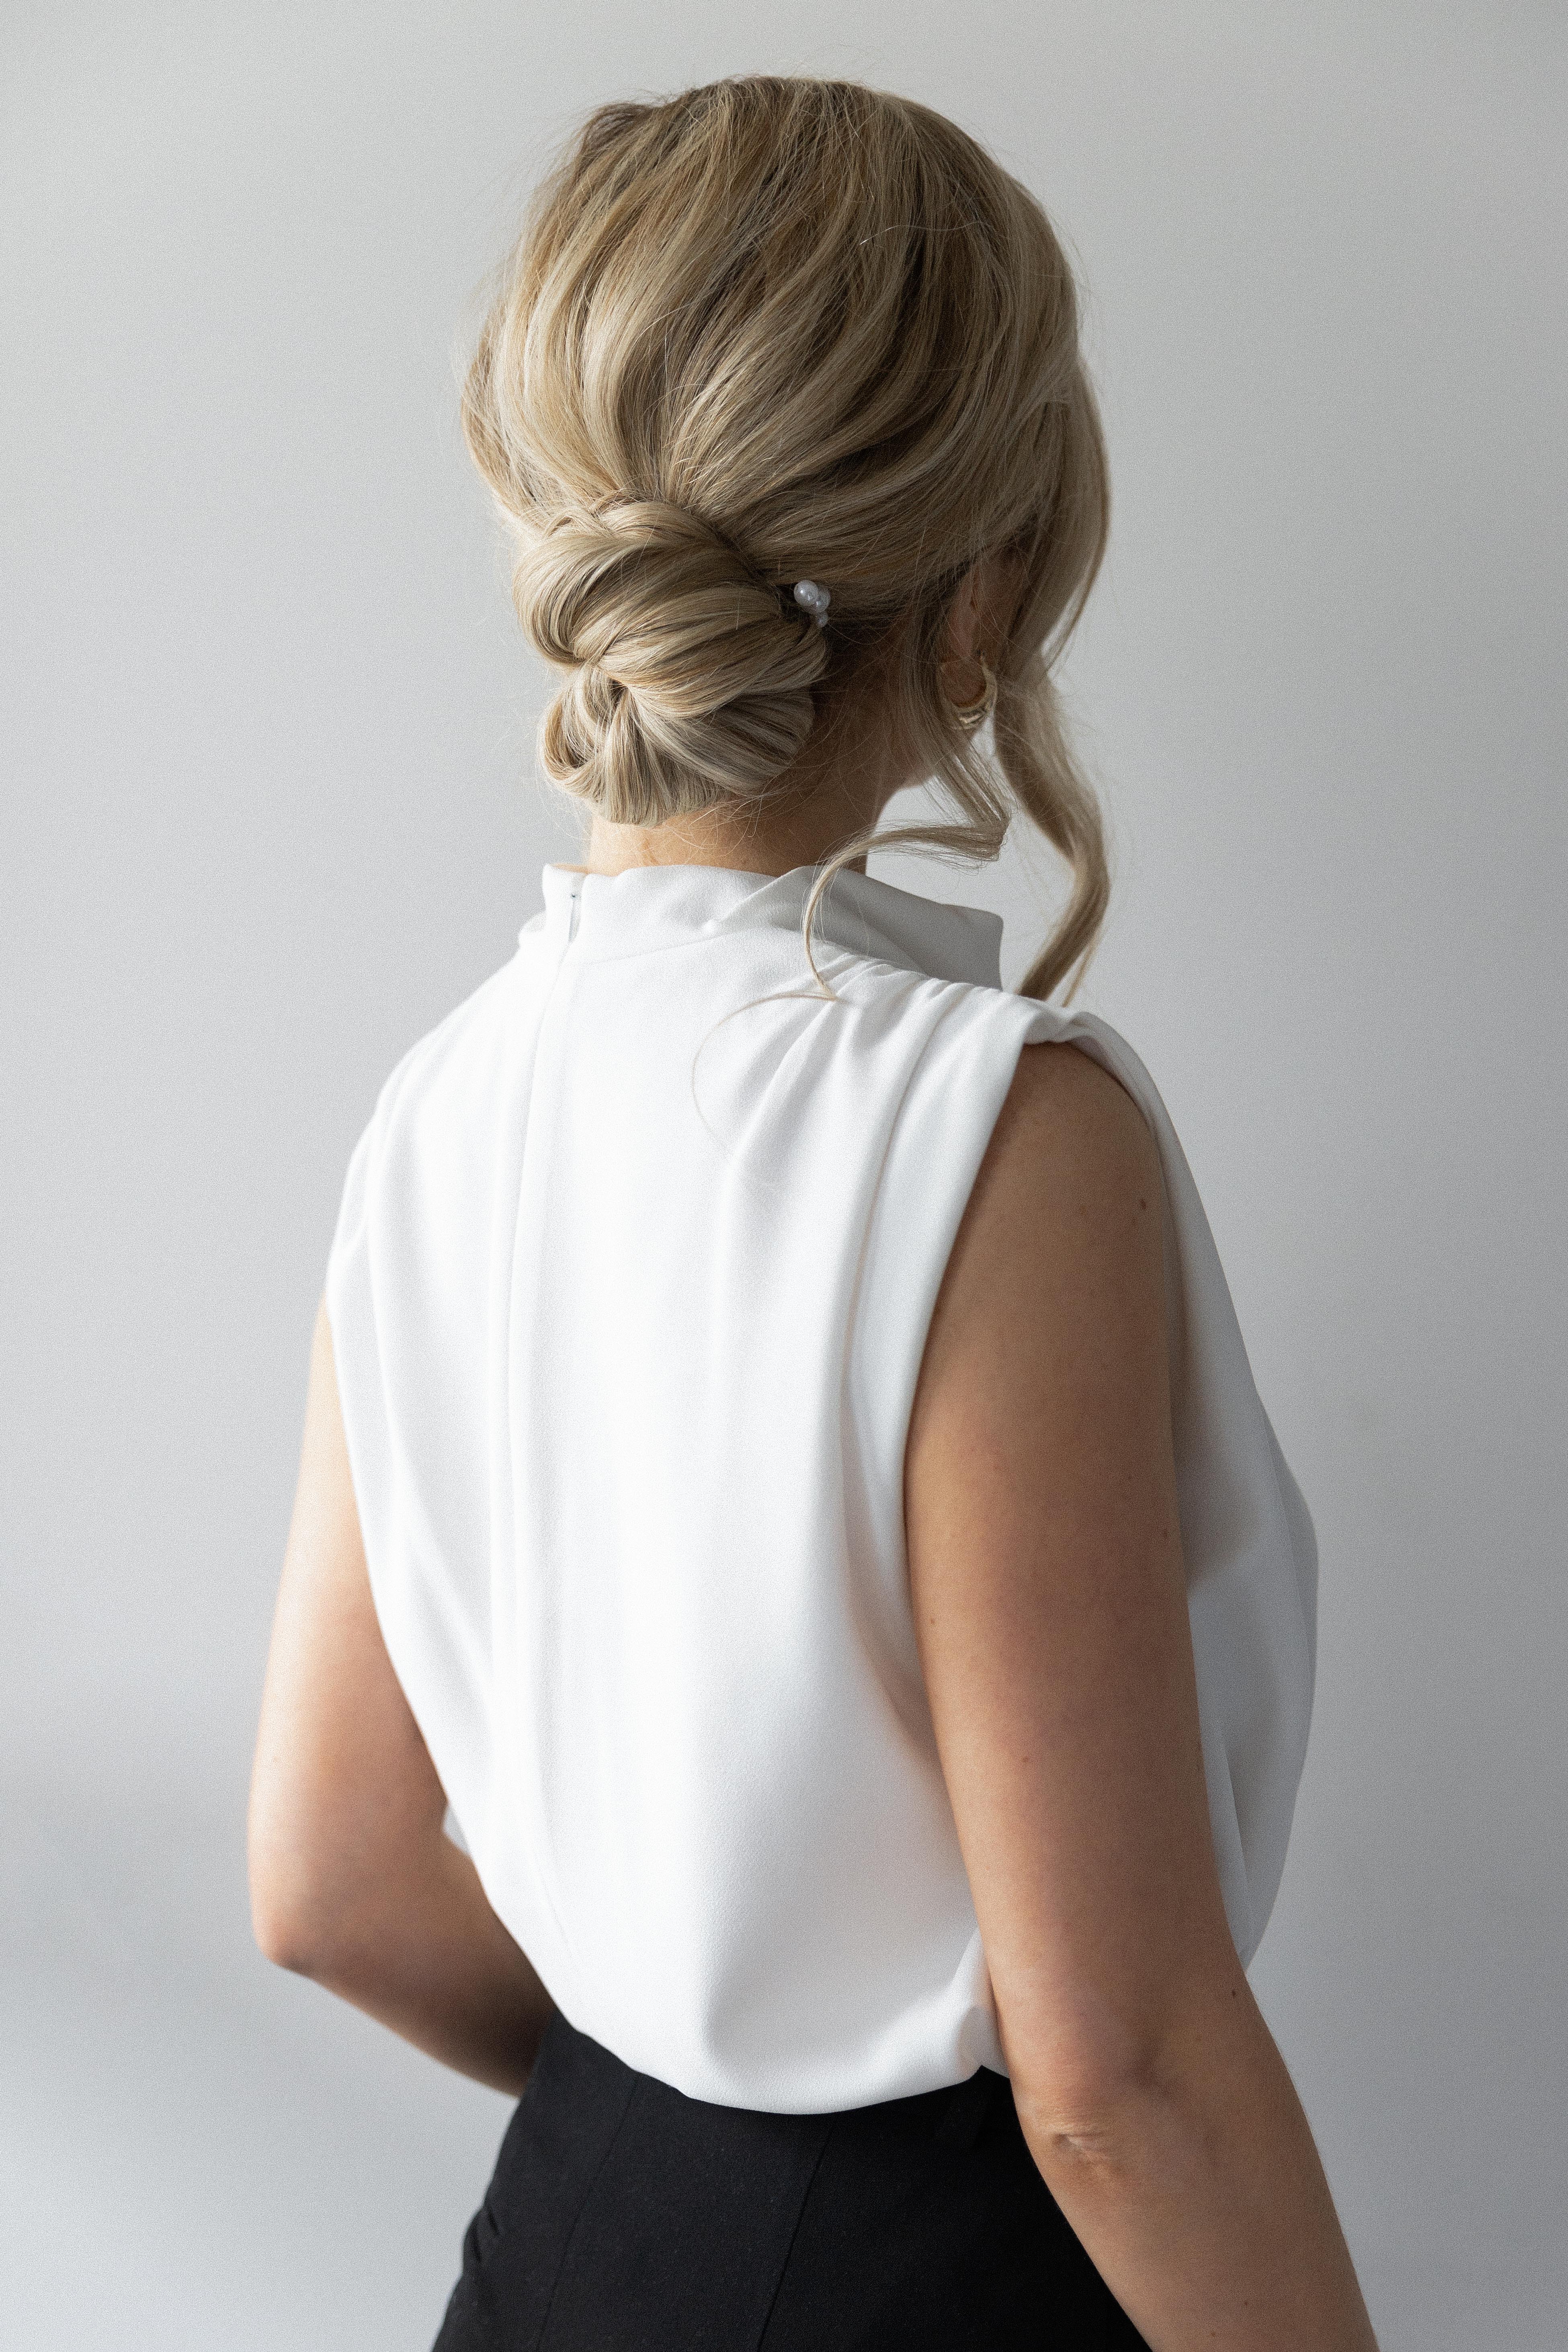 2 Updo Hairstyles For Homecoming  Hairstyles For Girls  Princess  Hairstyles